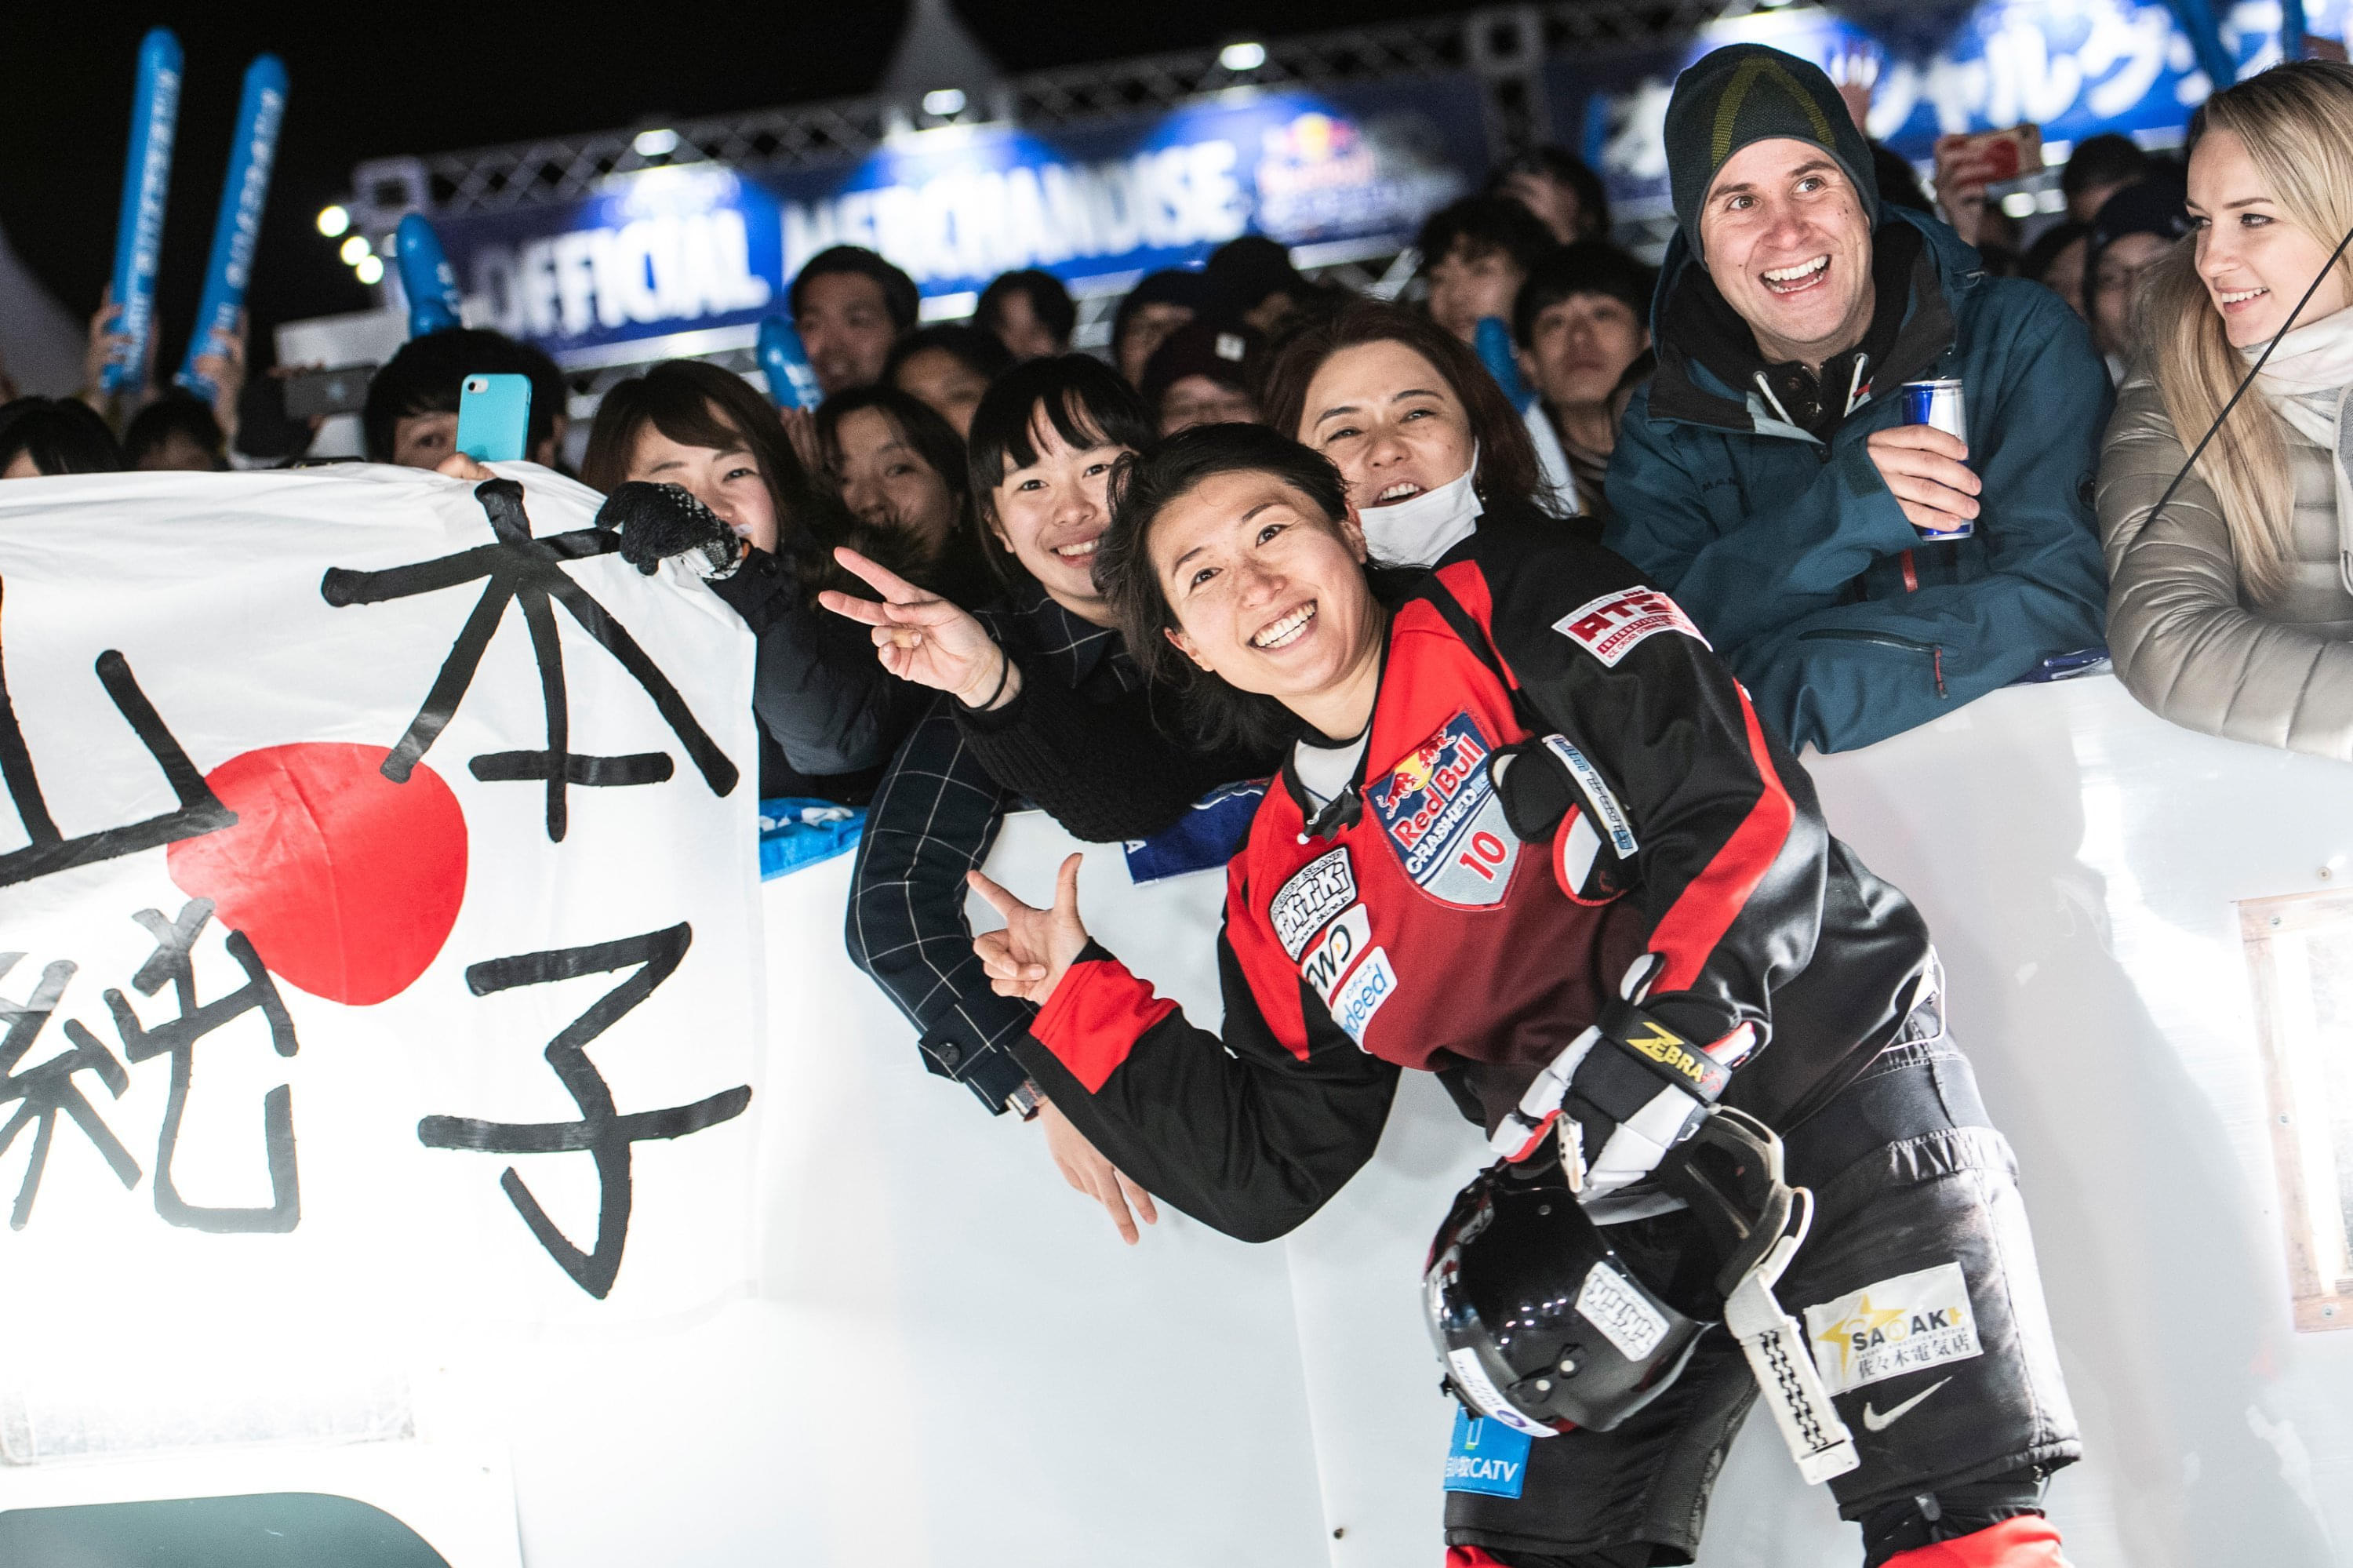 Junko Yamamoto poses for a photo with some fans. Image: Joerg Mitter / Red Bull Content Pool